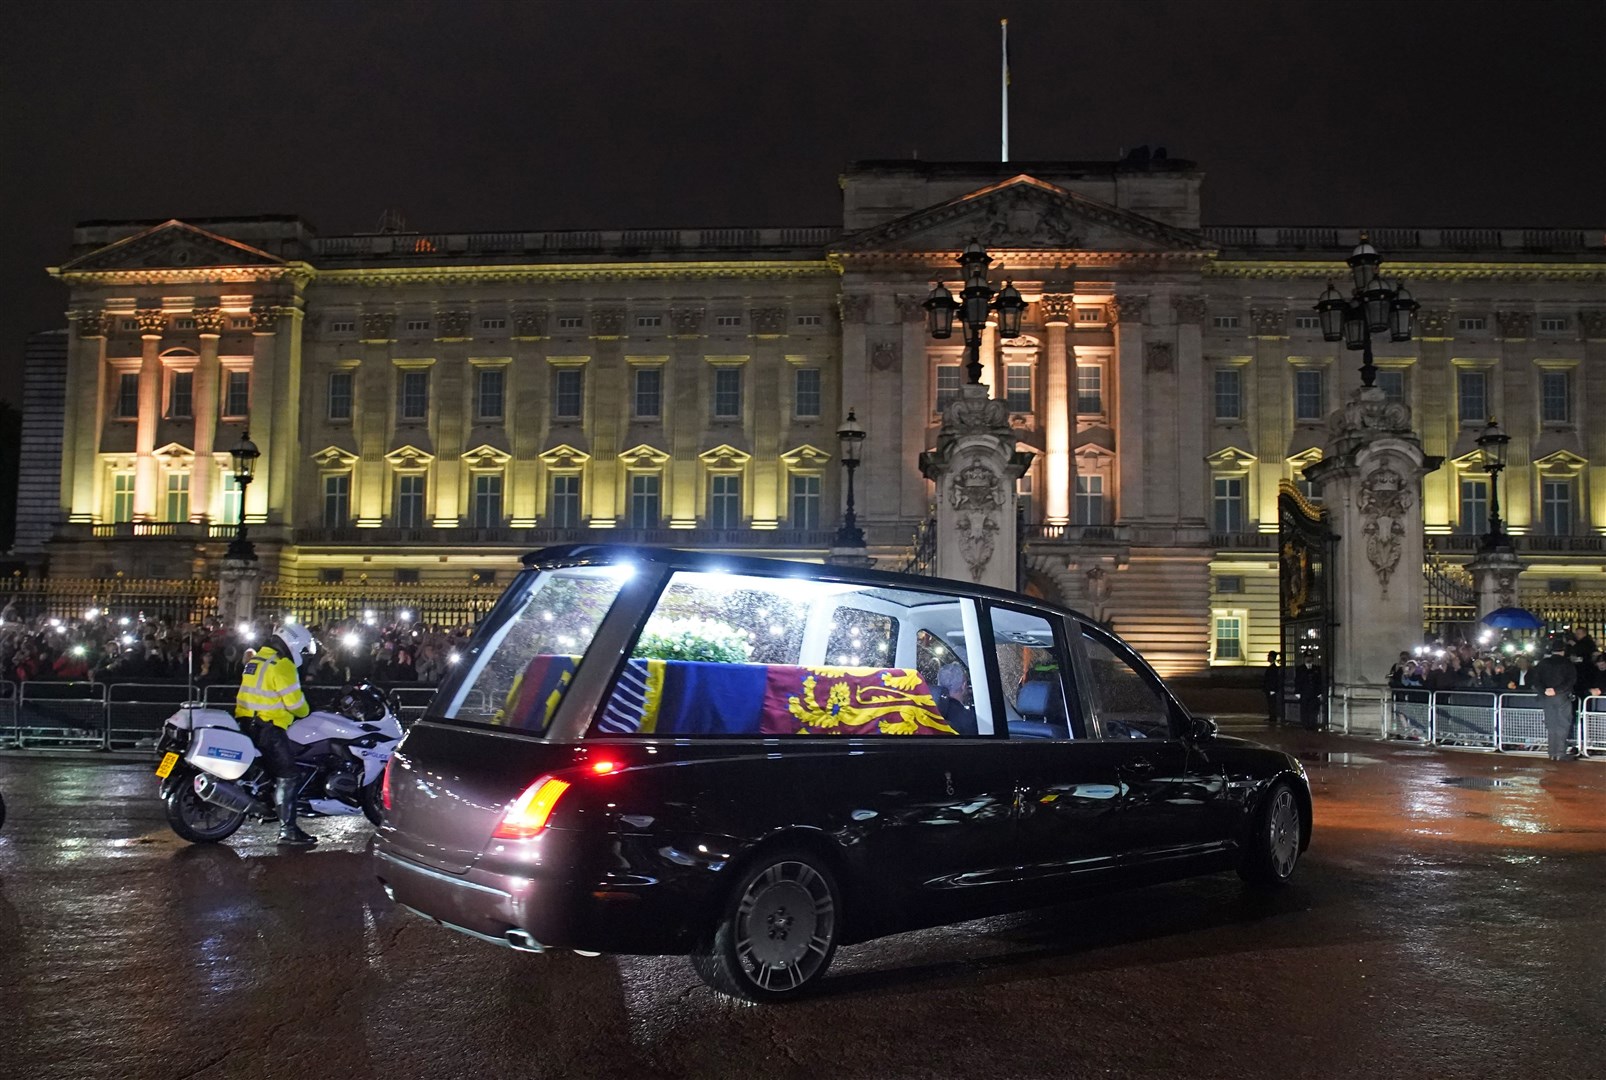 The hearse carrying the coffin of Queen Elizabeth II arrives at Buckingham Palace (Gareth Fuller/PA)